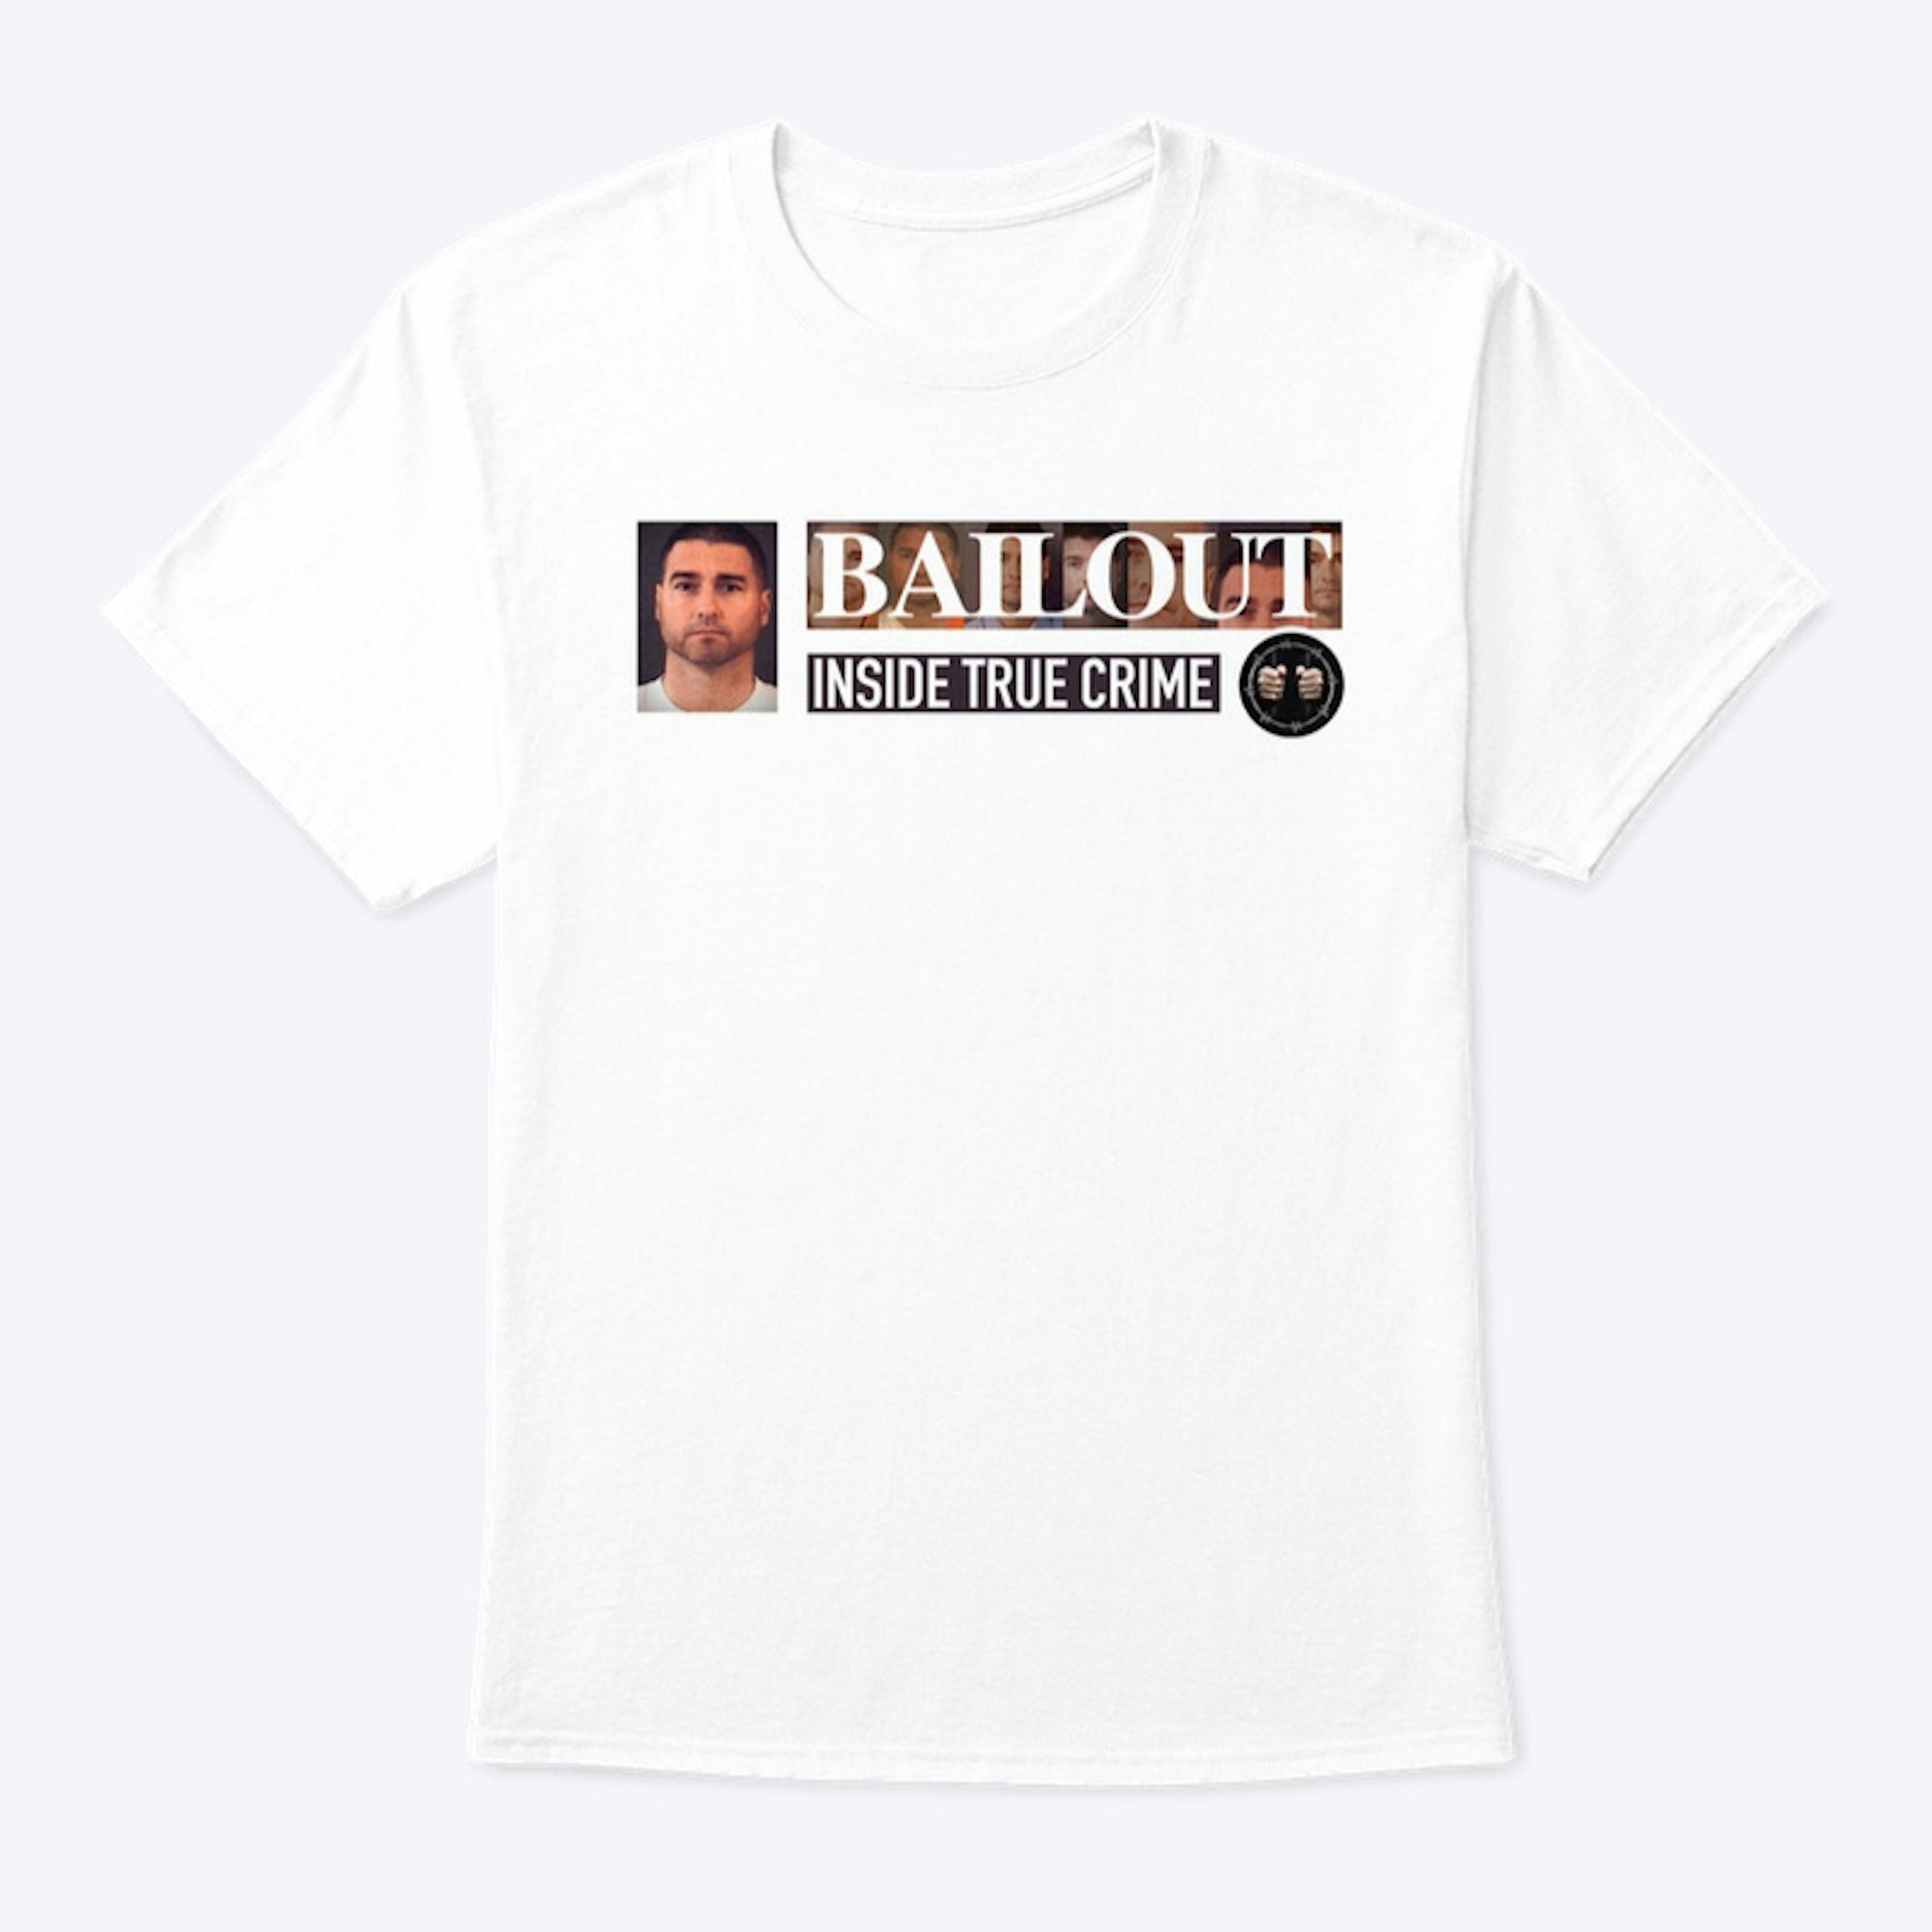 Bailout tee